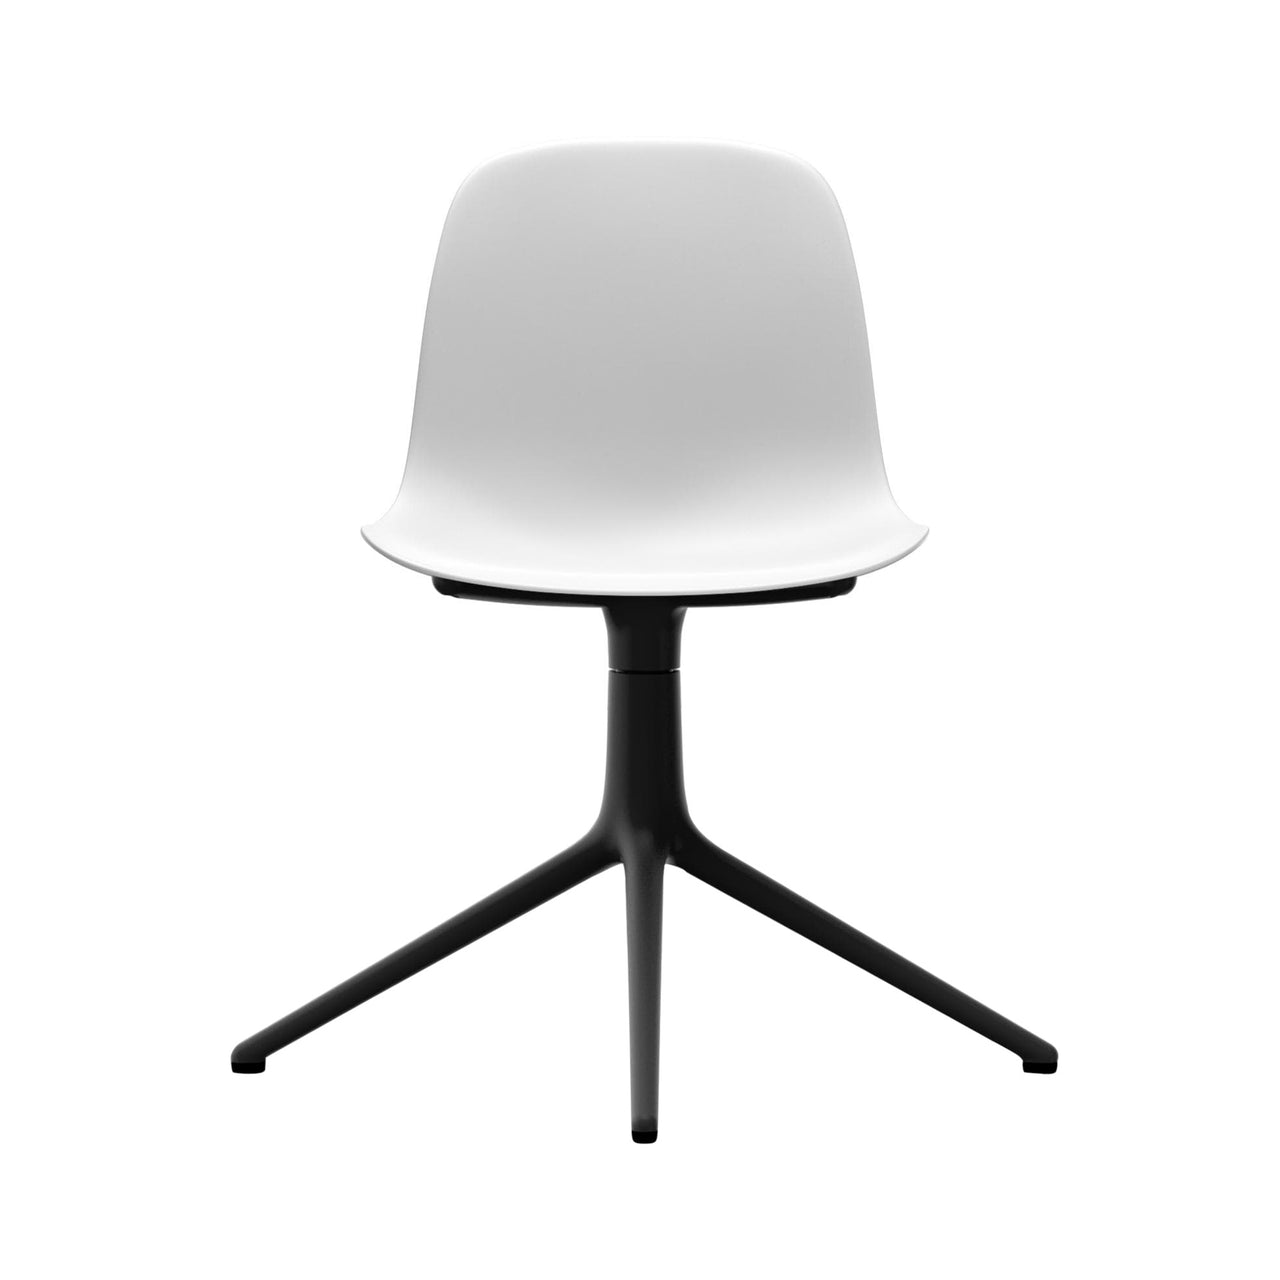 Form Chair: Swivel + White + Black Aluminum + Without Casters